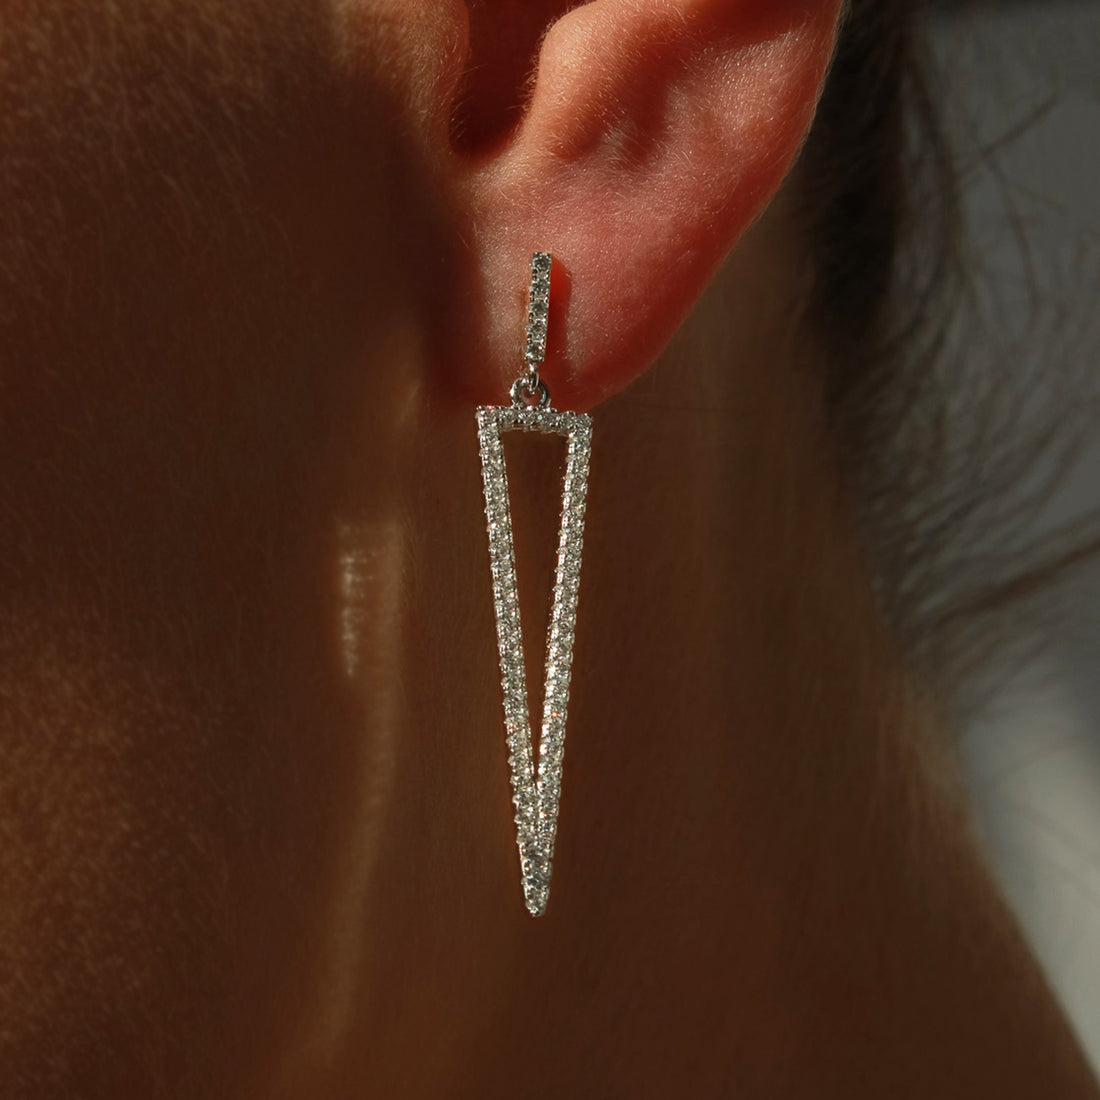 Sterling Silver Statement Drop Triangle earrings encrusted with sparkling CZ stones.